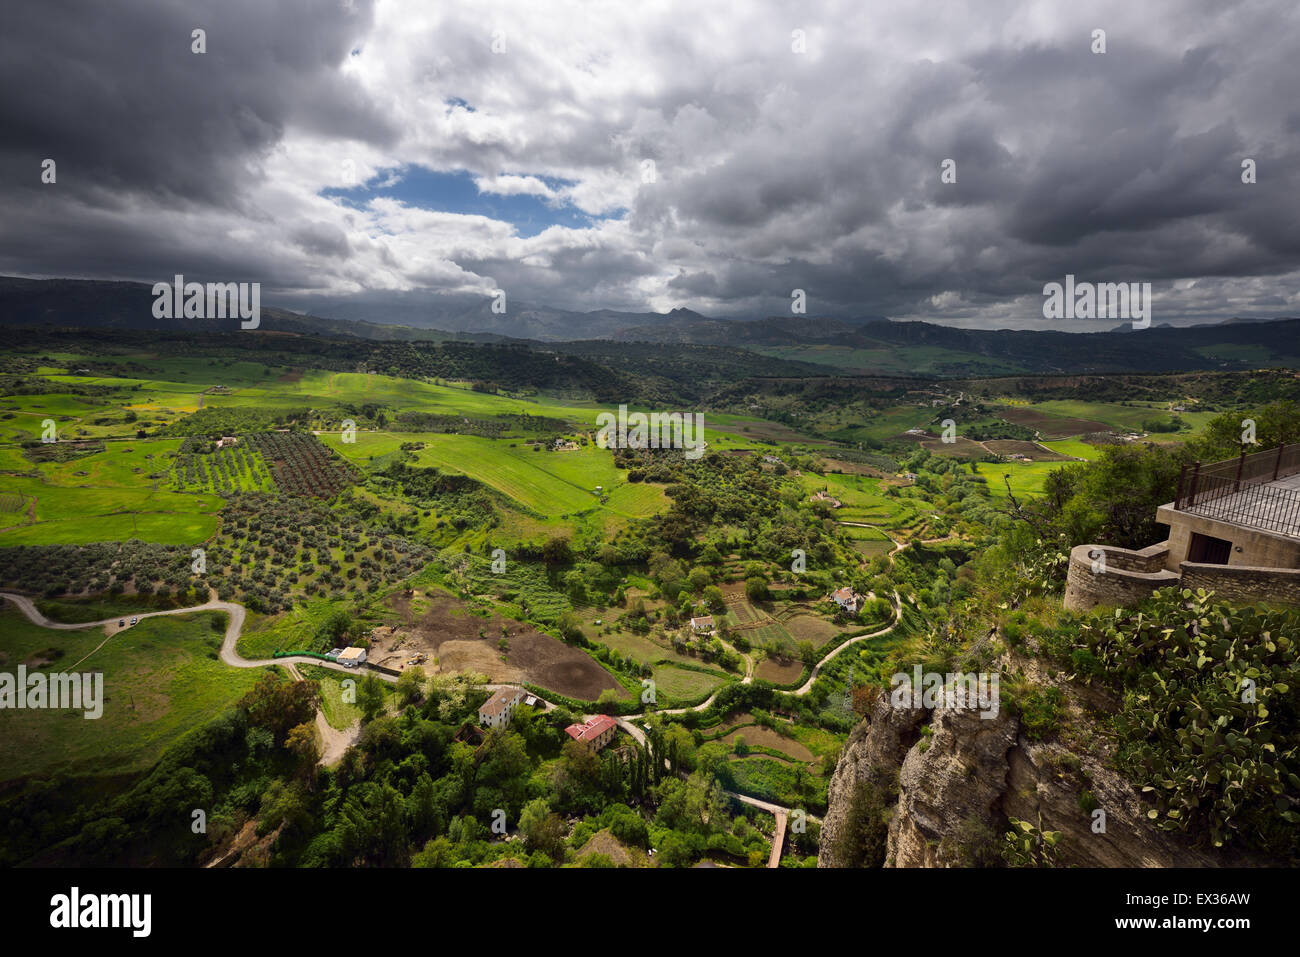 Dappled sunshine on green farm fields in valley below the mountain city of Ronda Spain Stock Photo